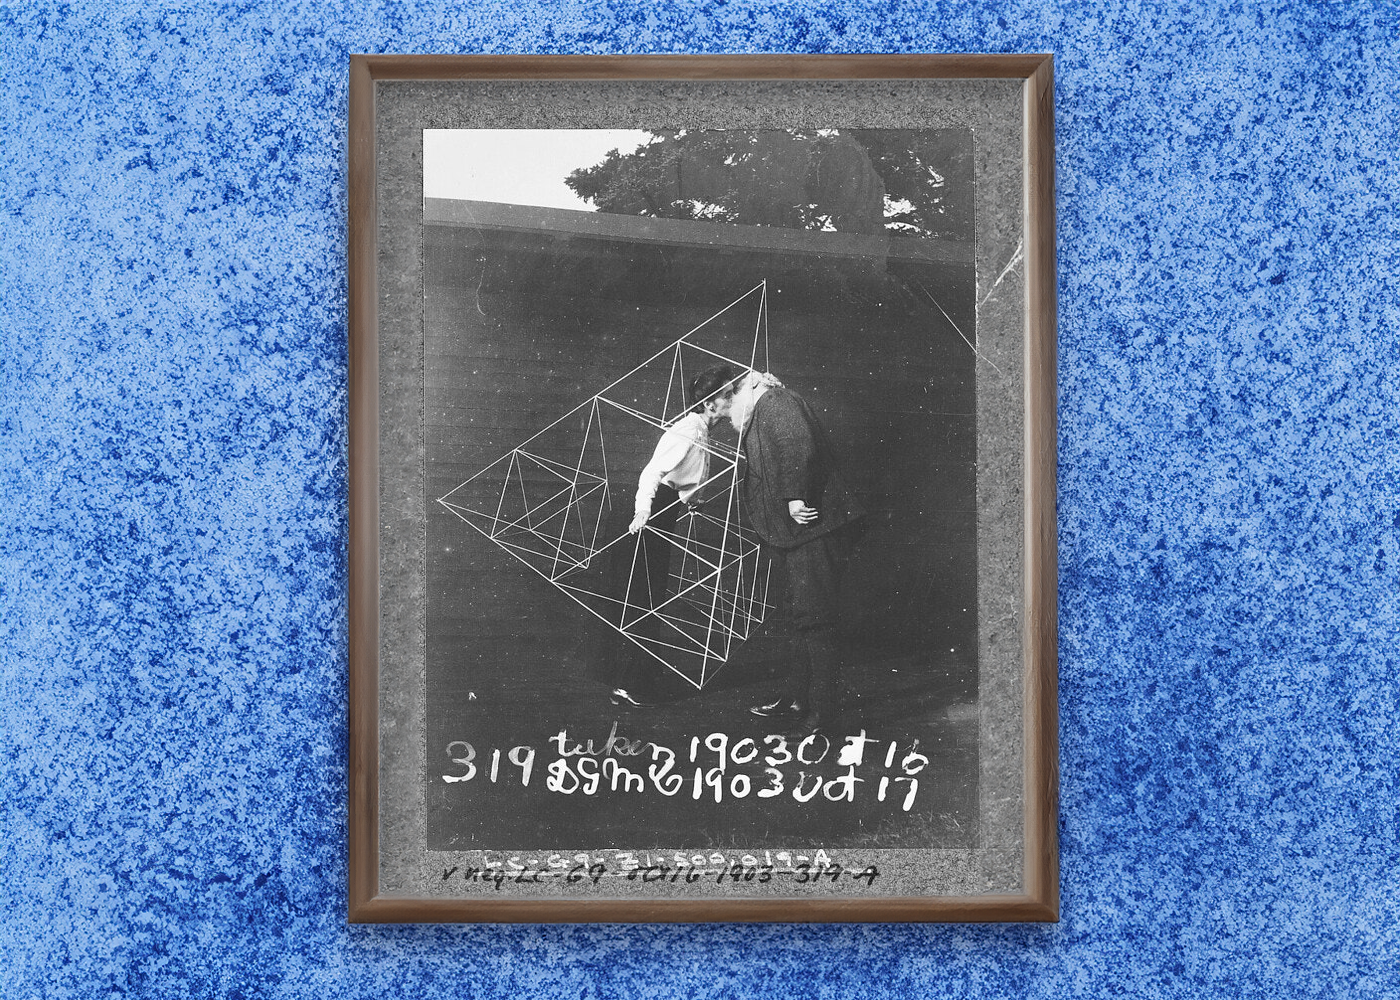 Alexander Graham Bell kissing his wife Mabel, within a tetrahedral kite, in 1903